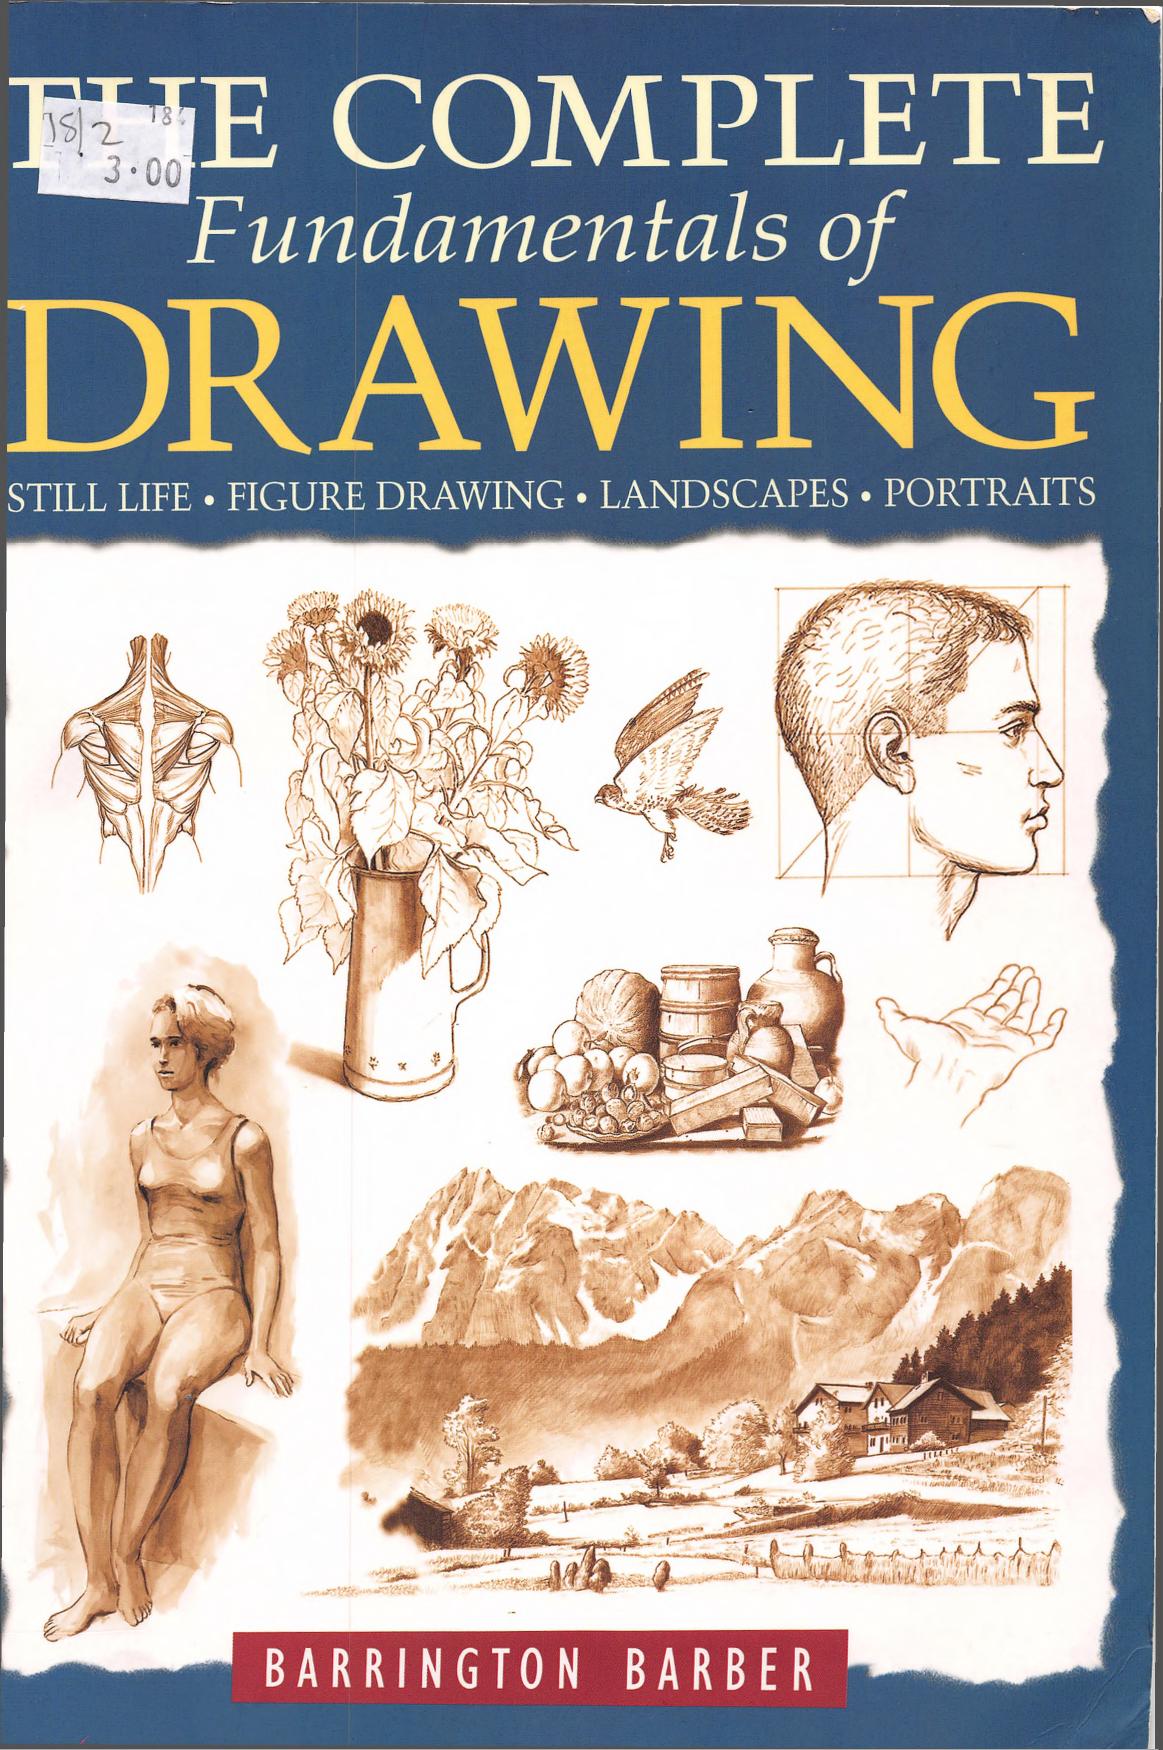 Fundamentals of Drawing by Barrington Barber